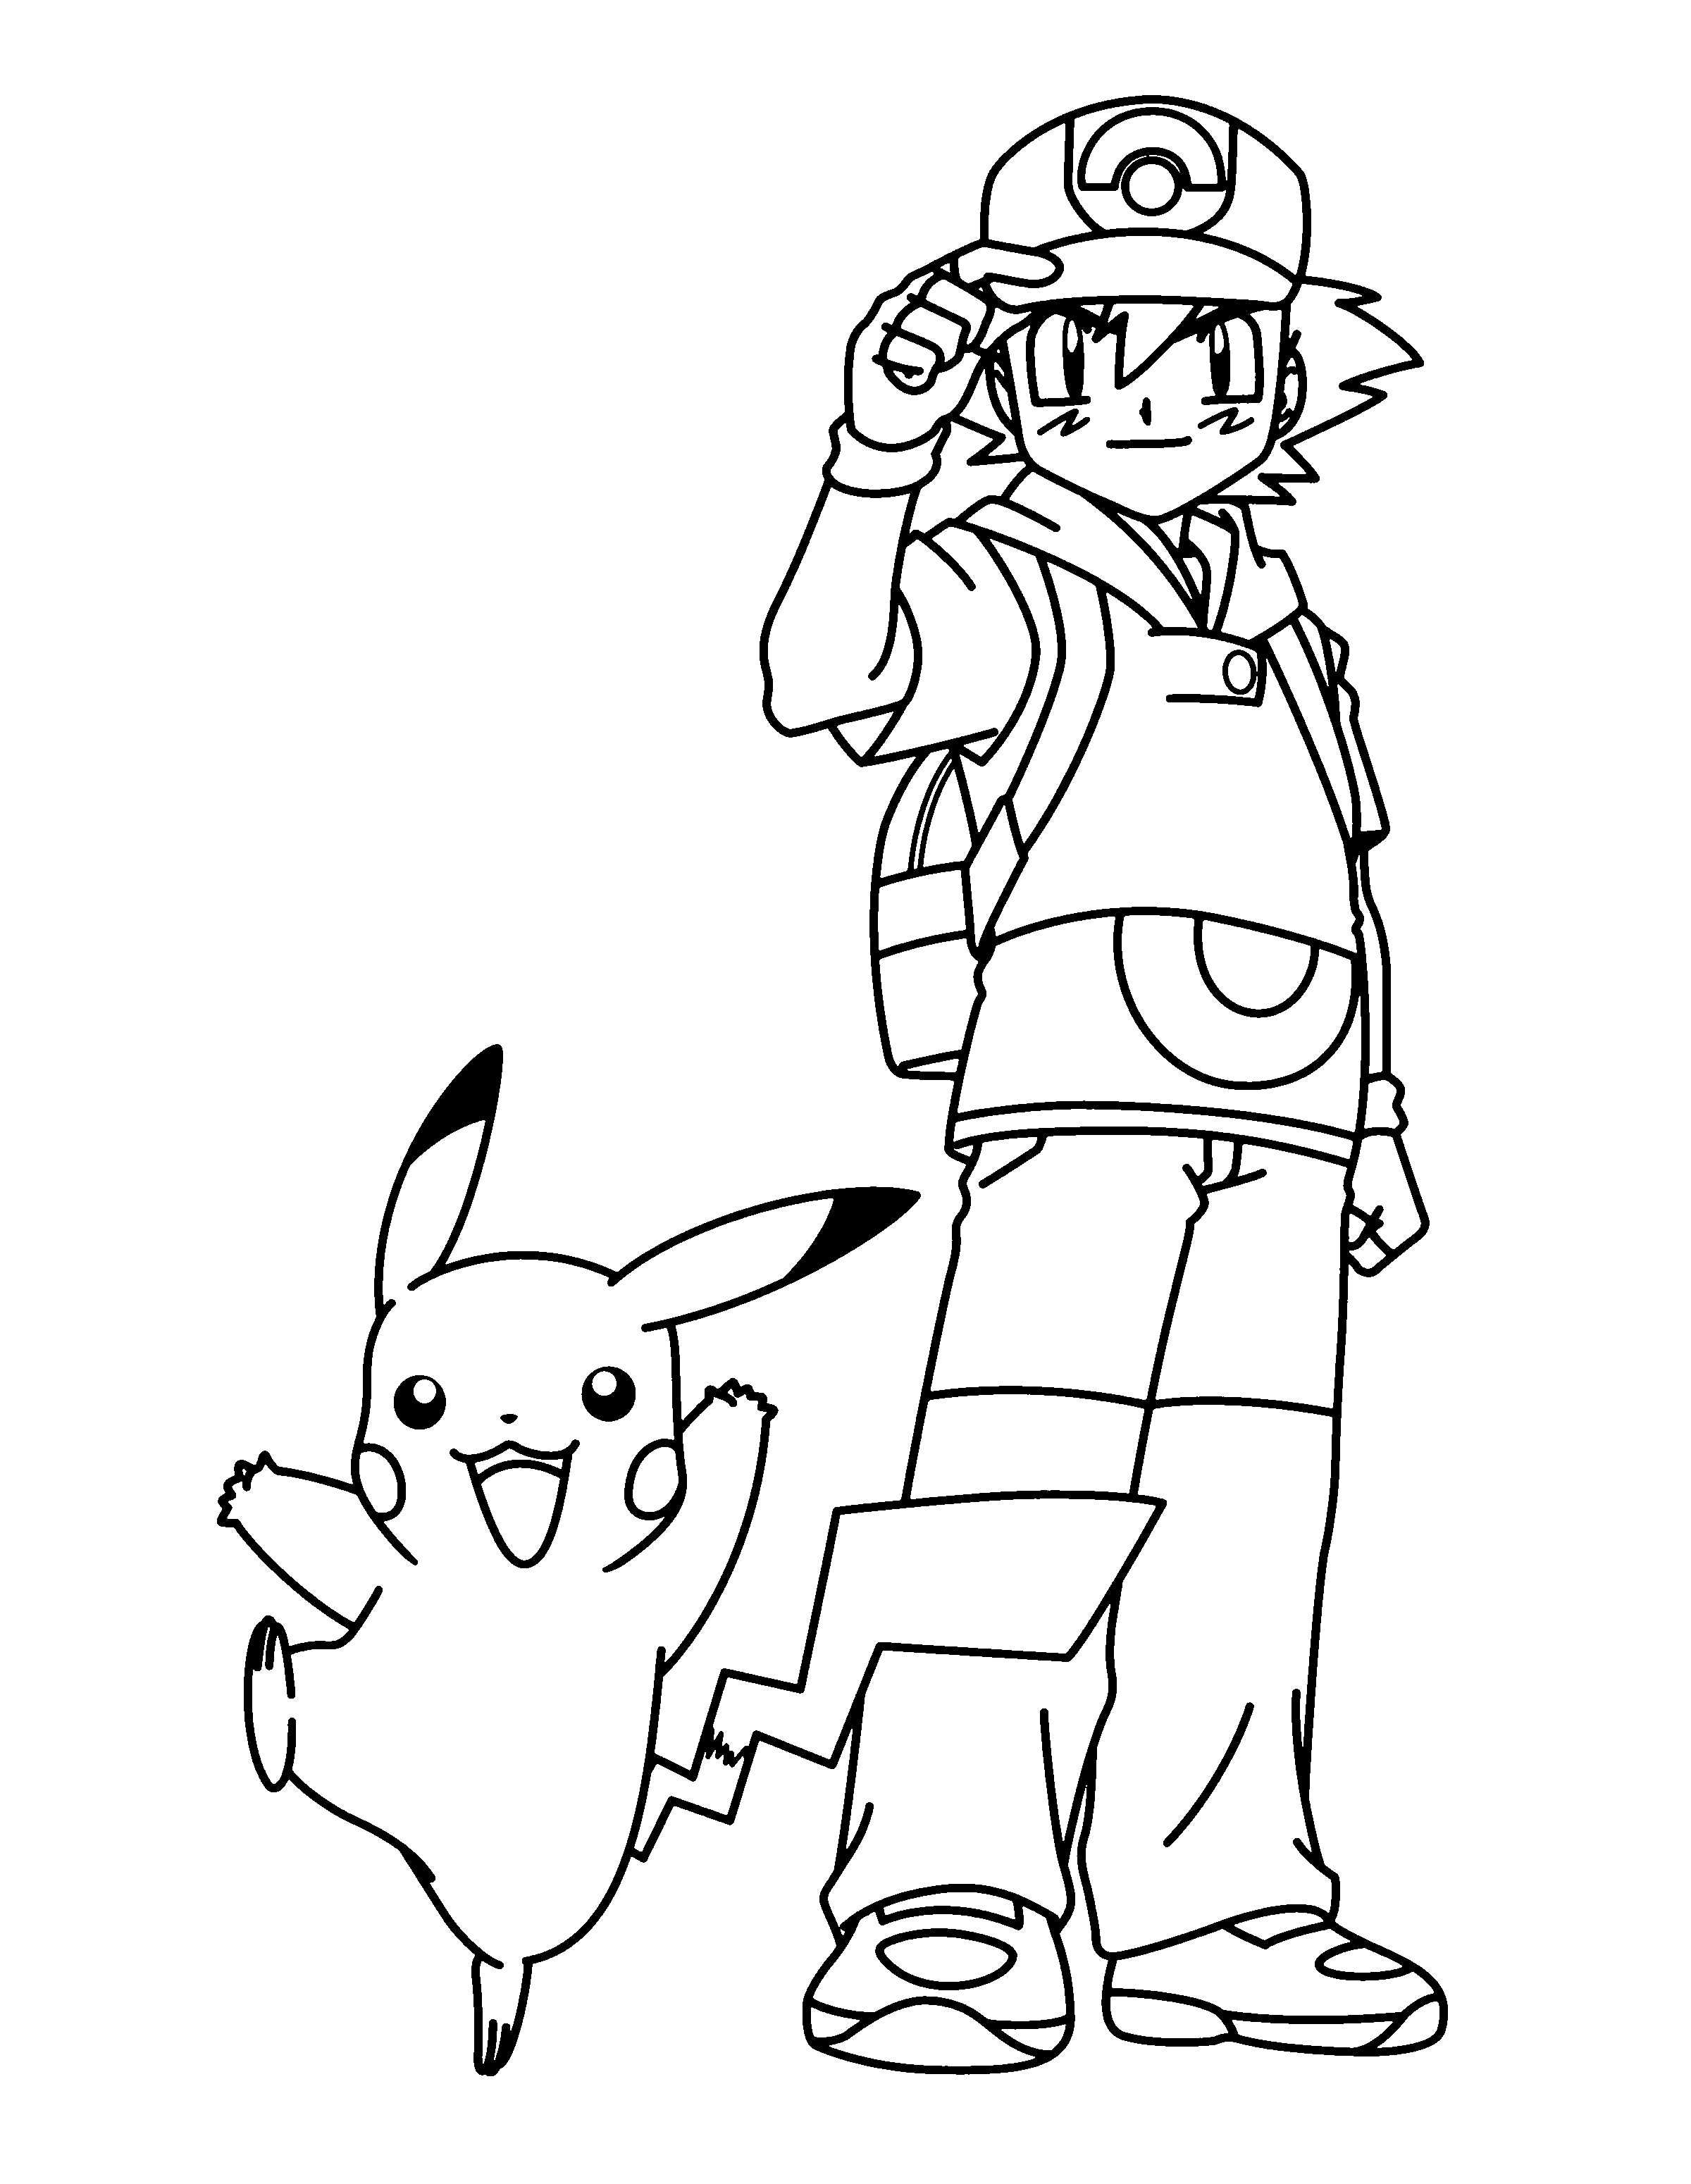 animated-coloring-pages-pokemon-image-1023